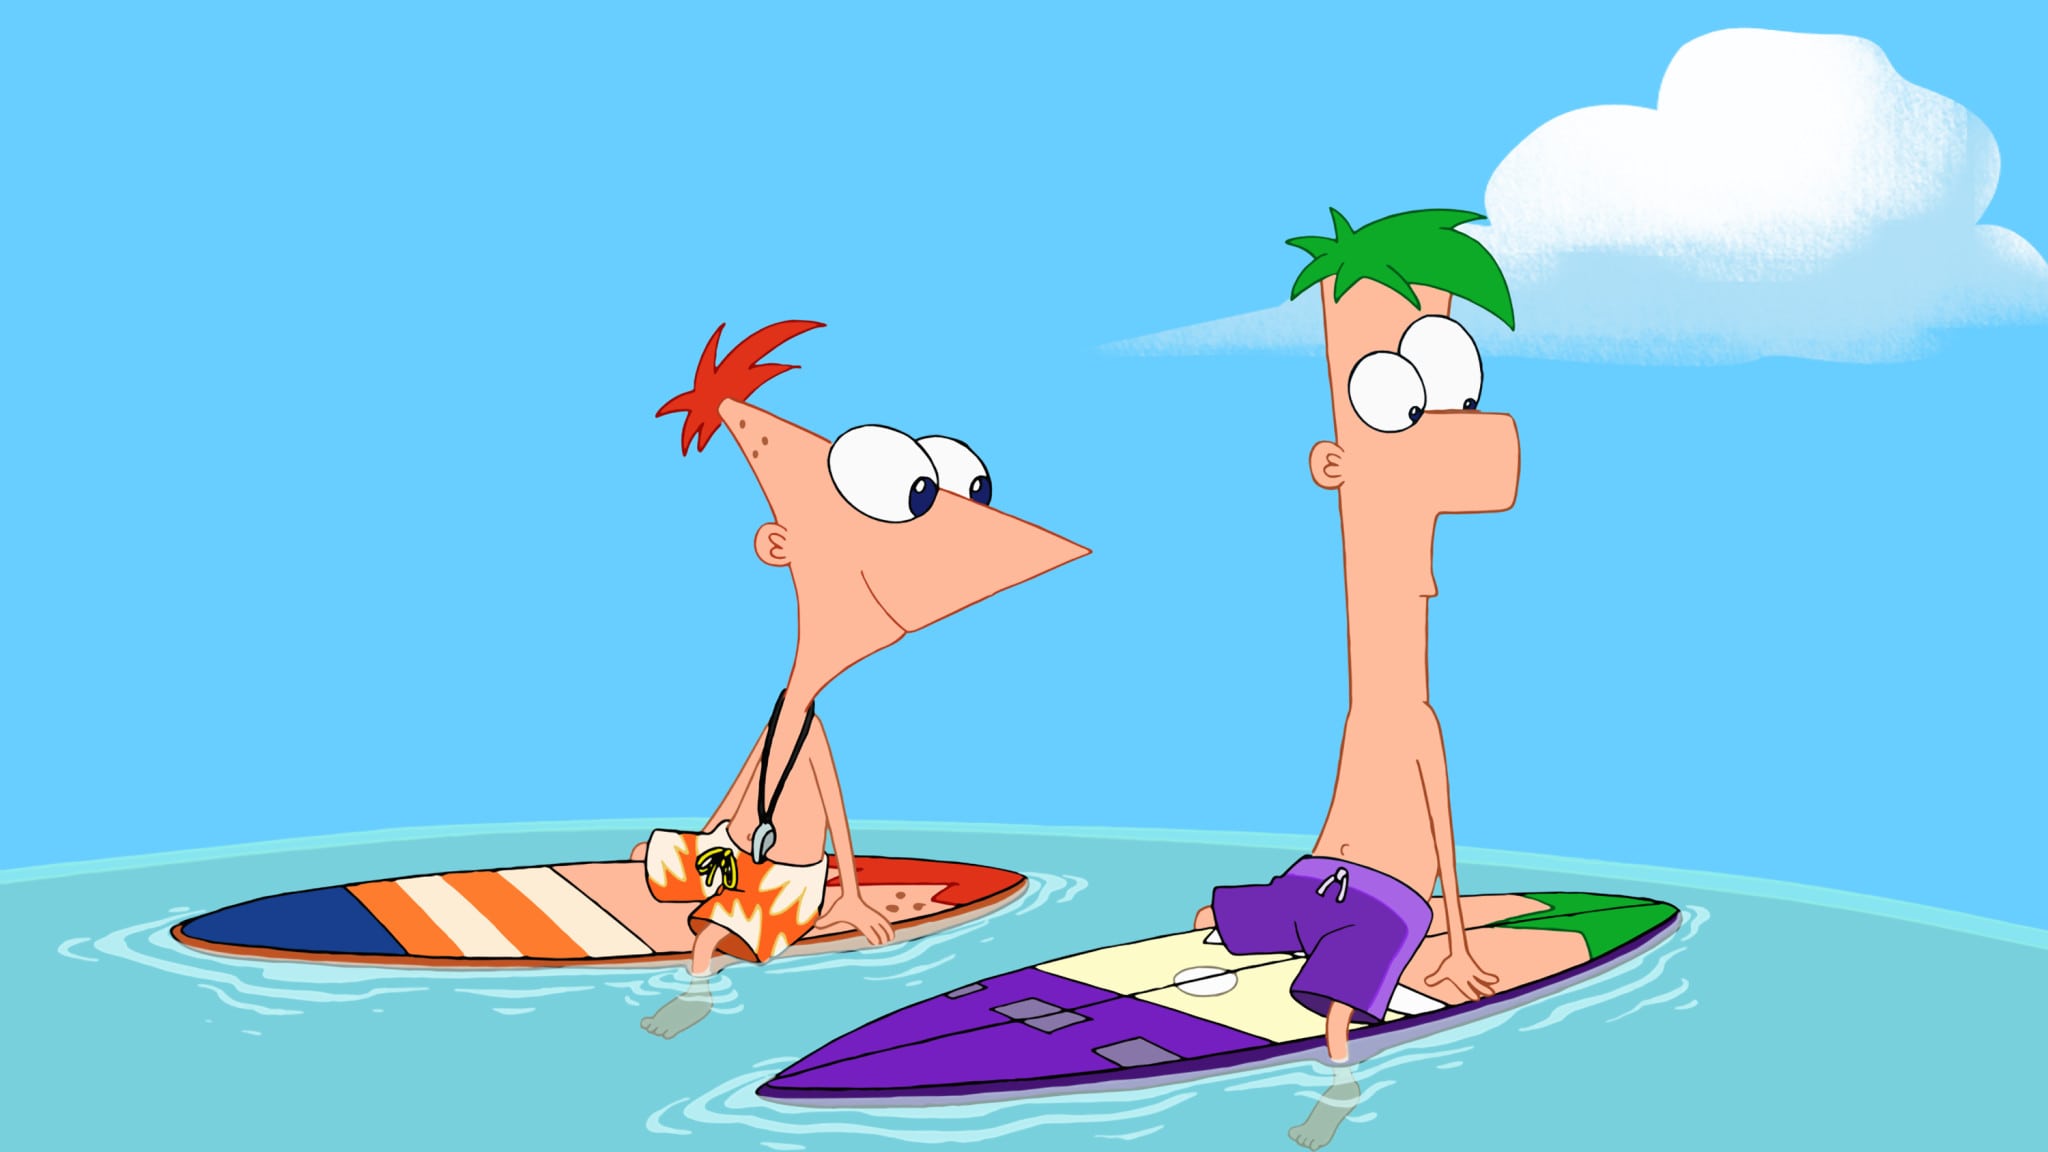 The comedian will guest star in 1-hour special “Phineas and Ferb ...